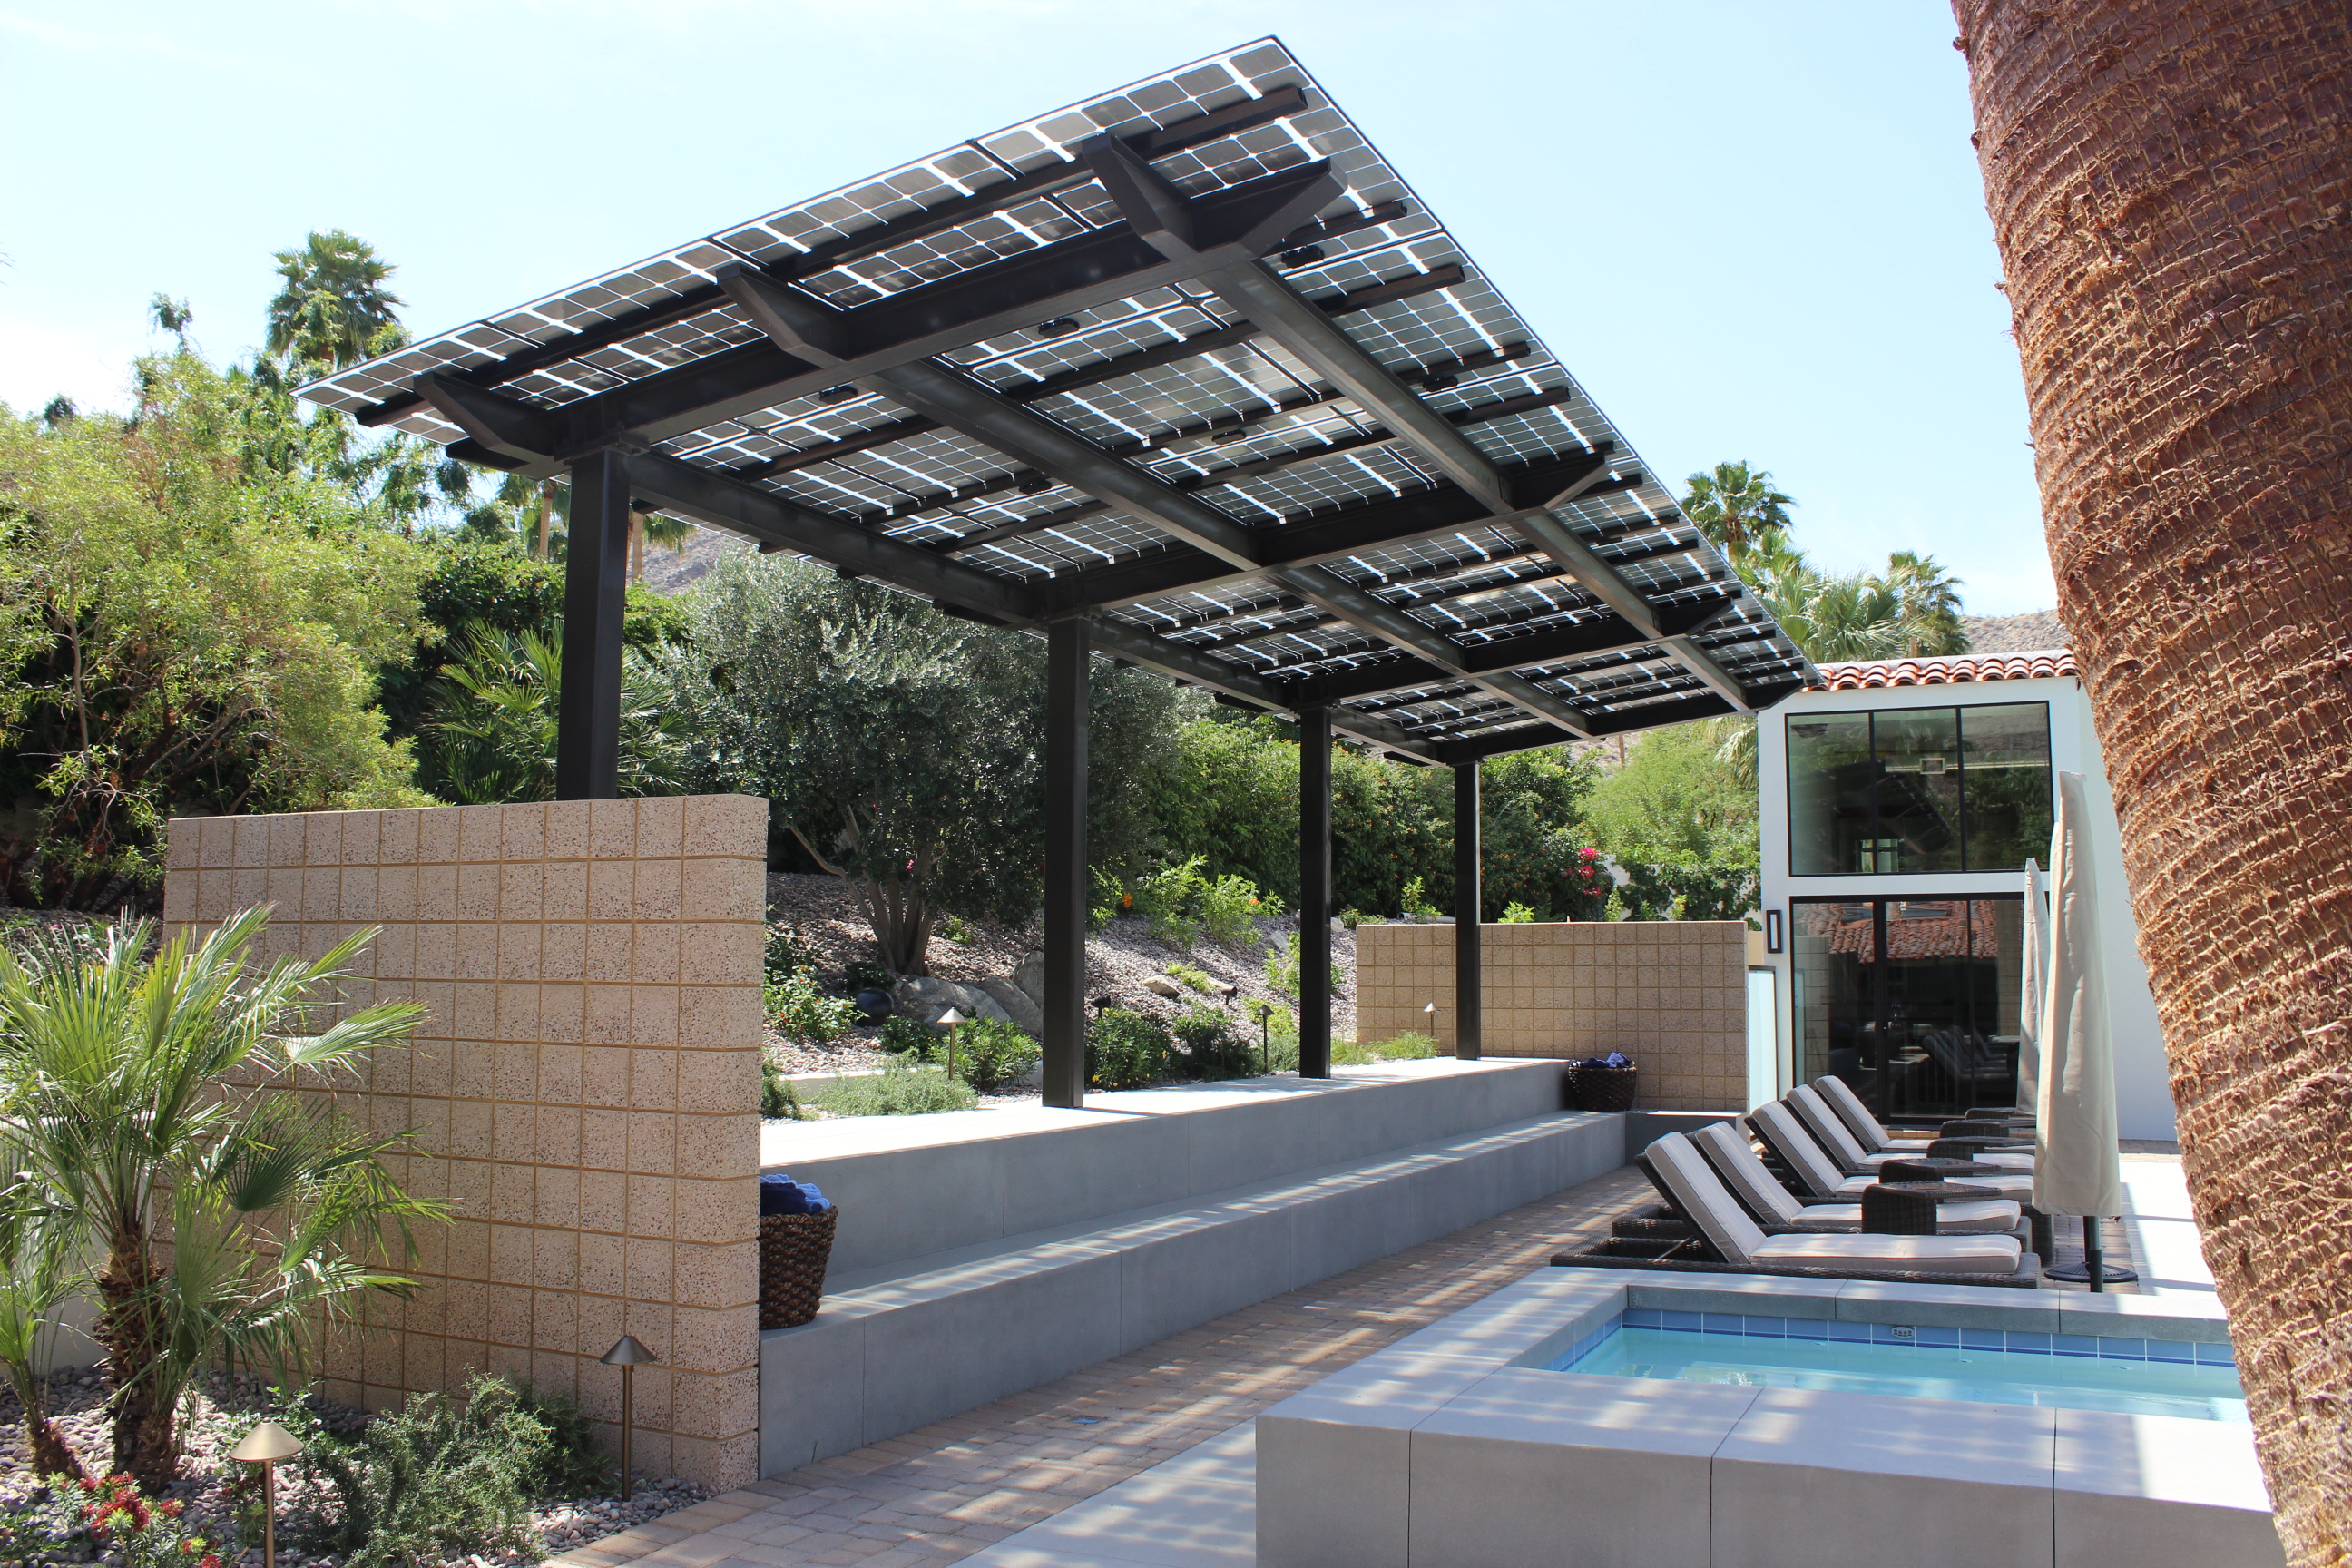 LSX Module Solar Patio Cover provides shade and solar power for this backyard swimming pool with the hills of Palm Springs in the background. Winner of Architectural Products PIA 2016 Award